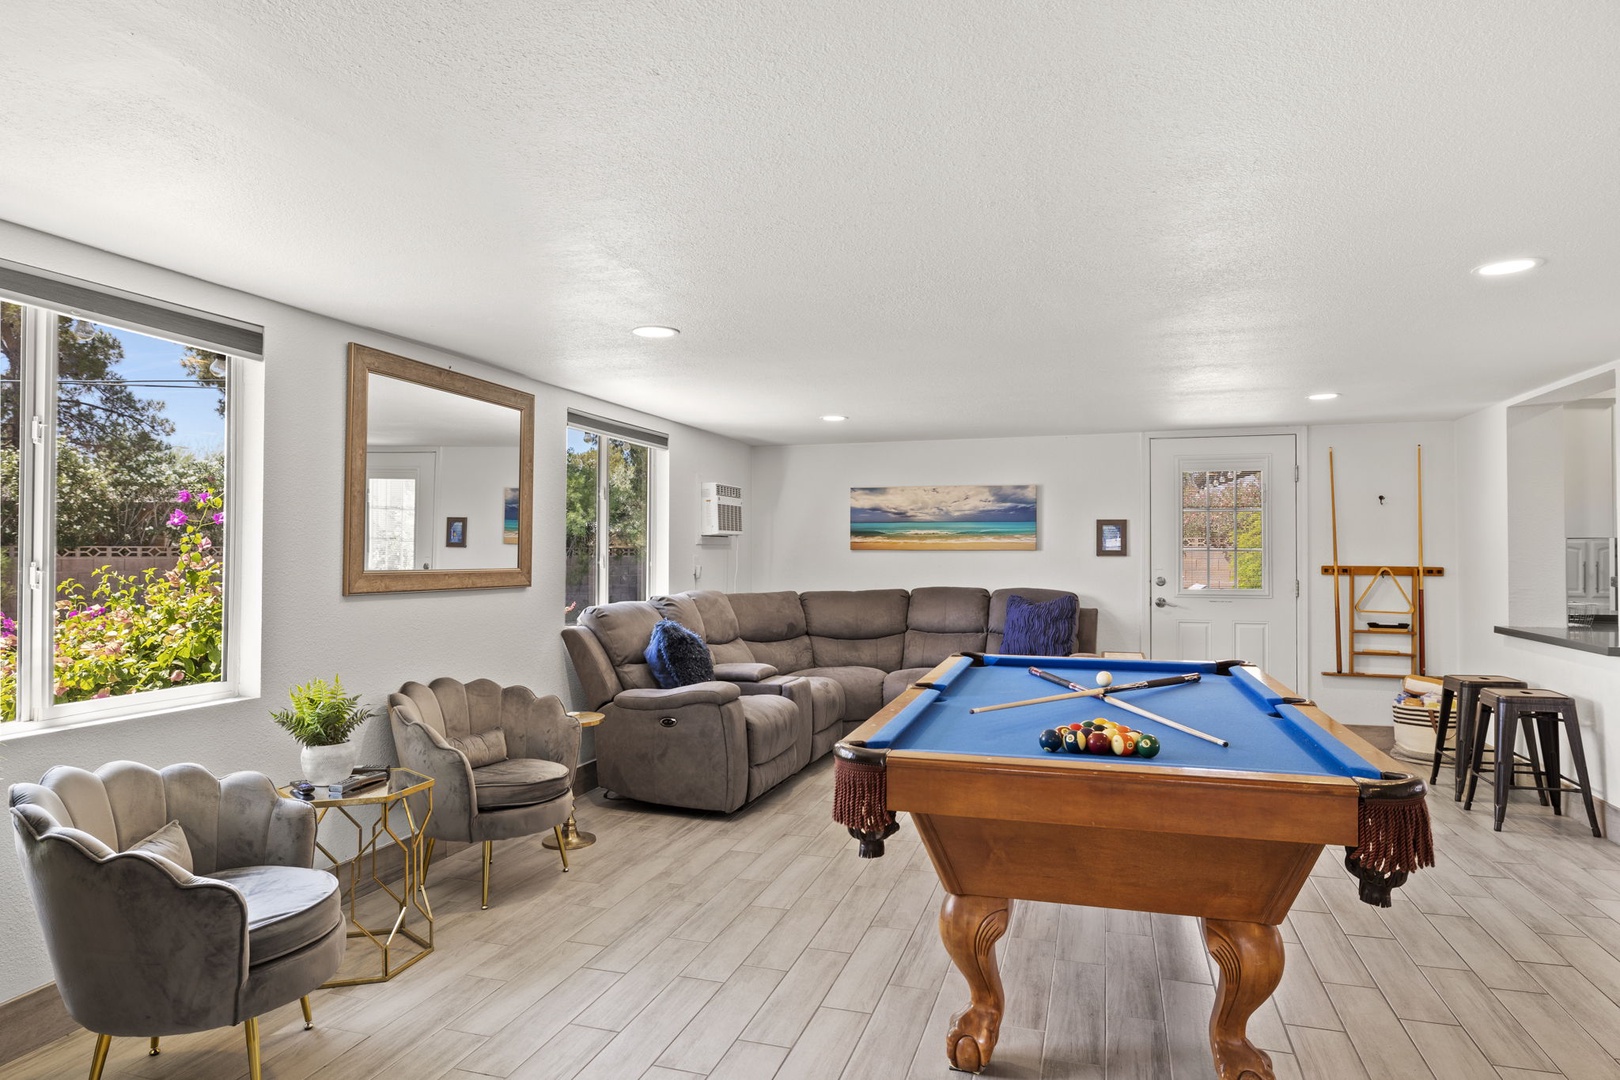 Game room with pool table and additional living area.